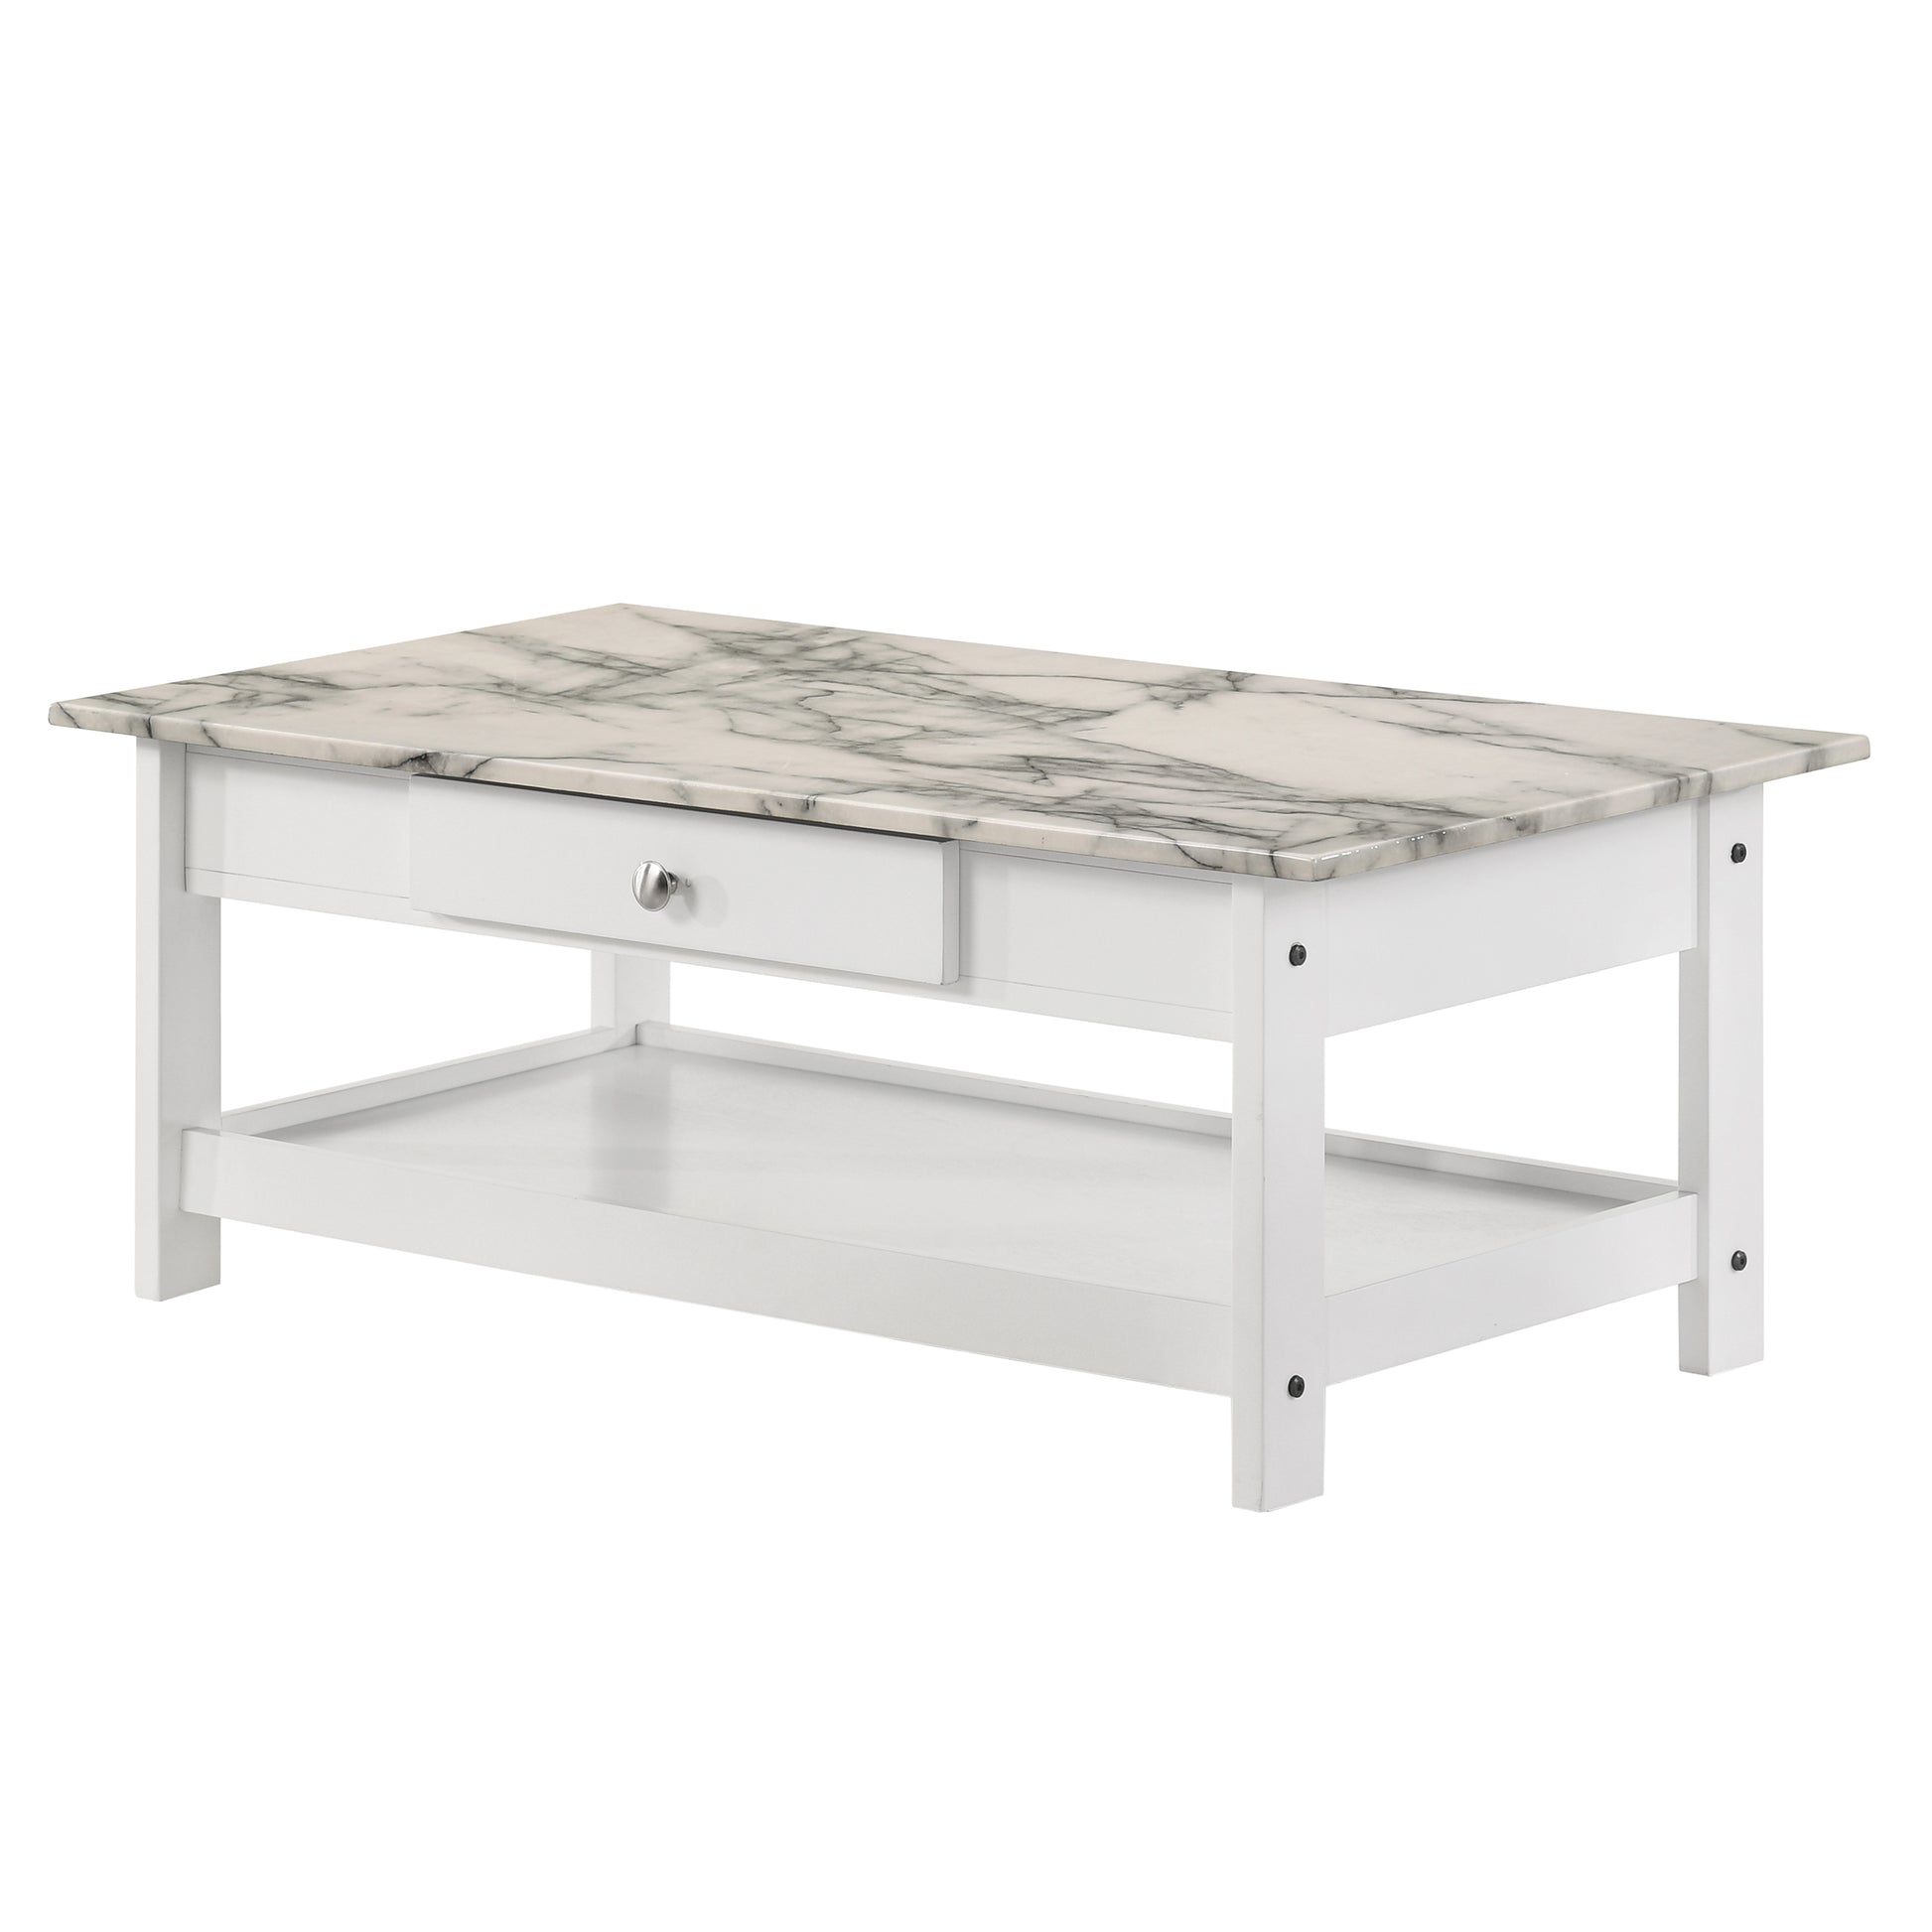 Left angled coffee table only from a four-piece modern white and faux marble coffee table set with lower shelves on a white background